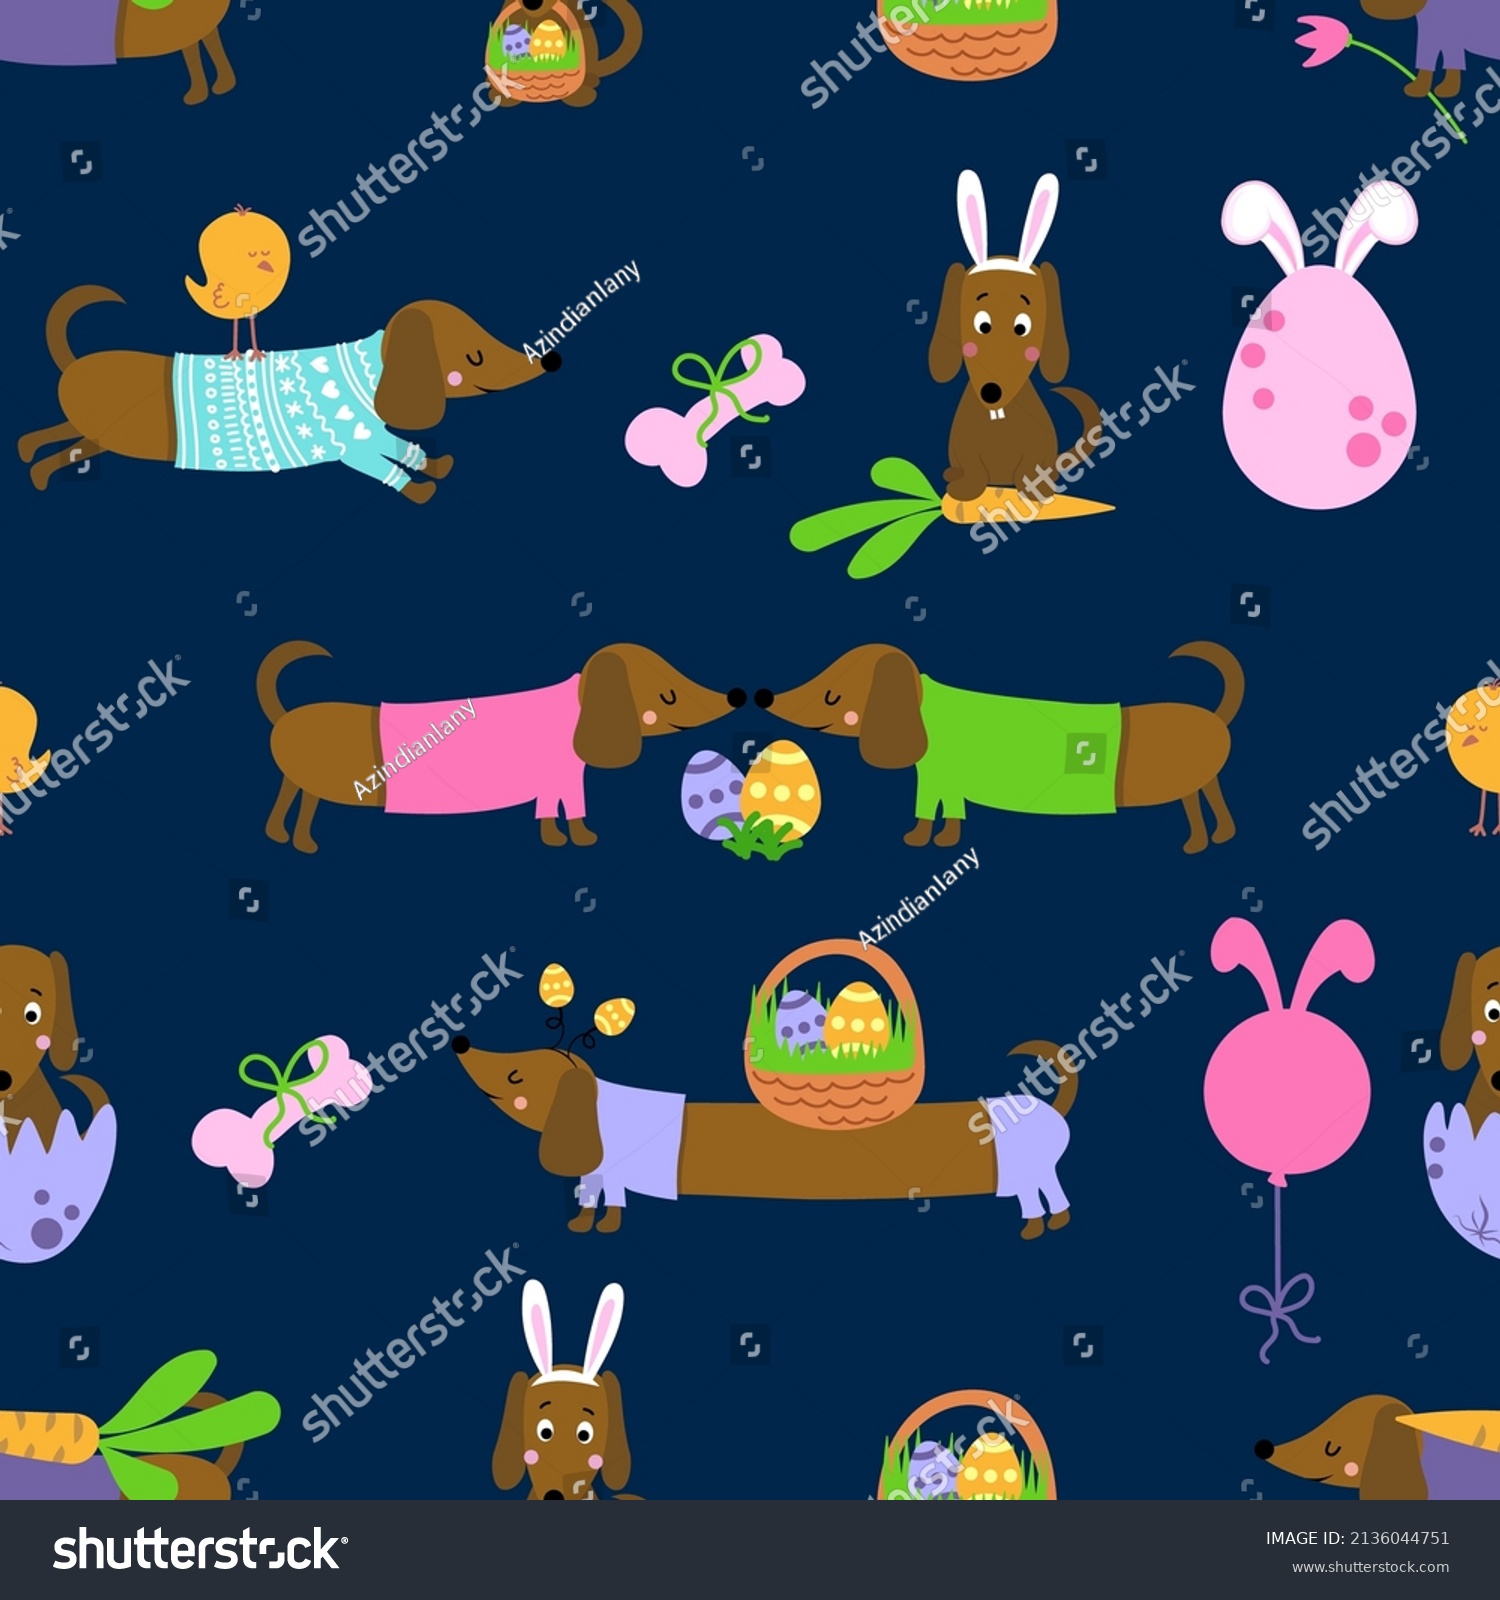 SVG of Dachshund Easter egg hunt party - Funny cartoon weiner dogs and eggs. Cute cactus, characters. Hand drawn doodle set for kids. For textiles, nursery, wallpapers, wrapping paper, clothes. svg